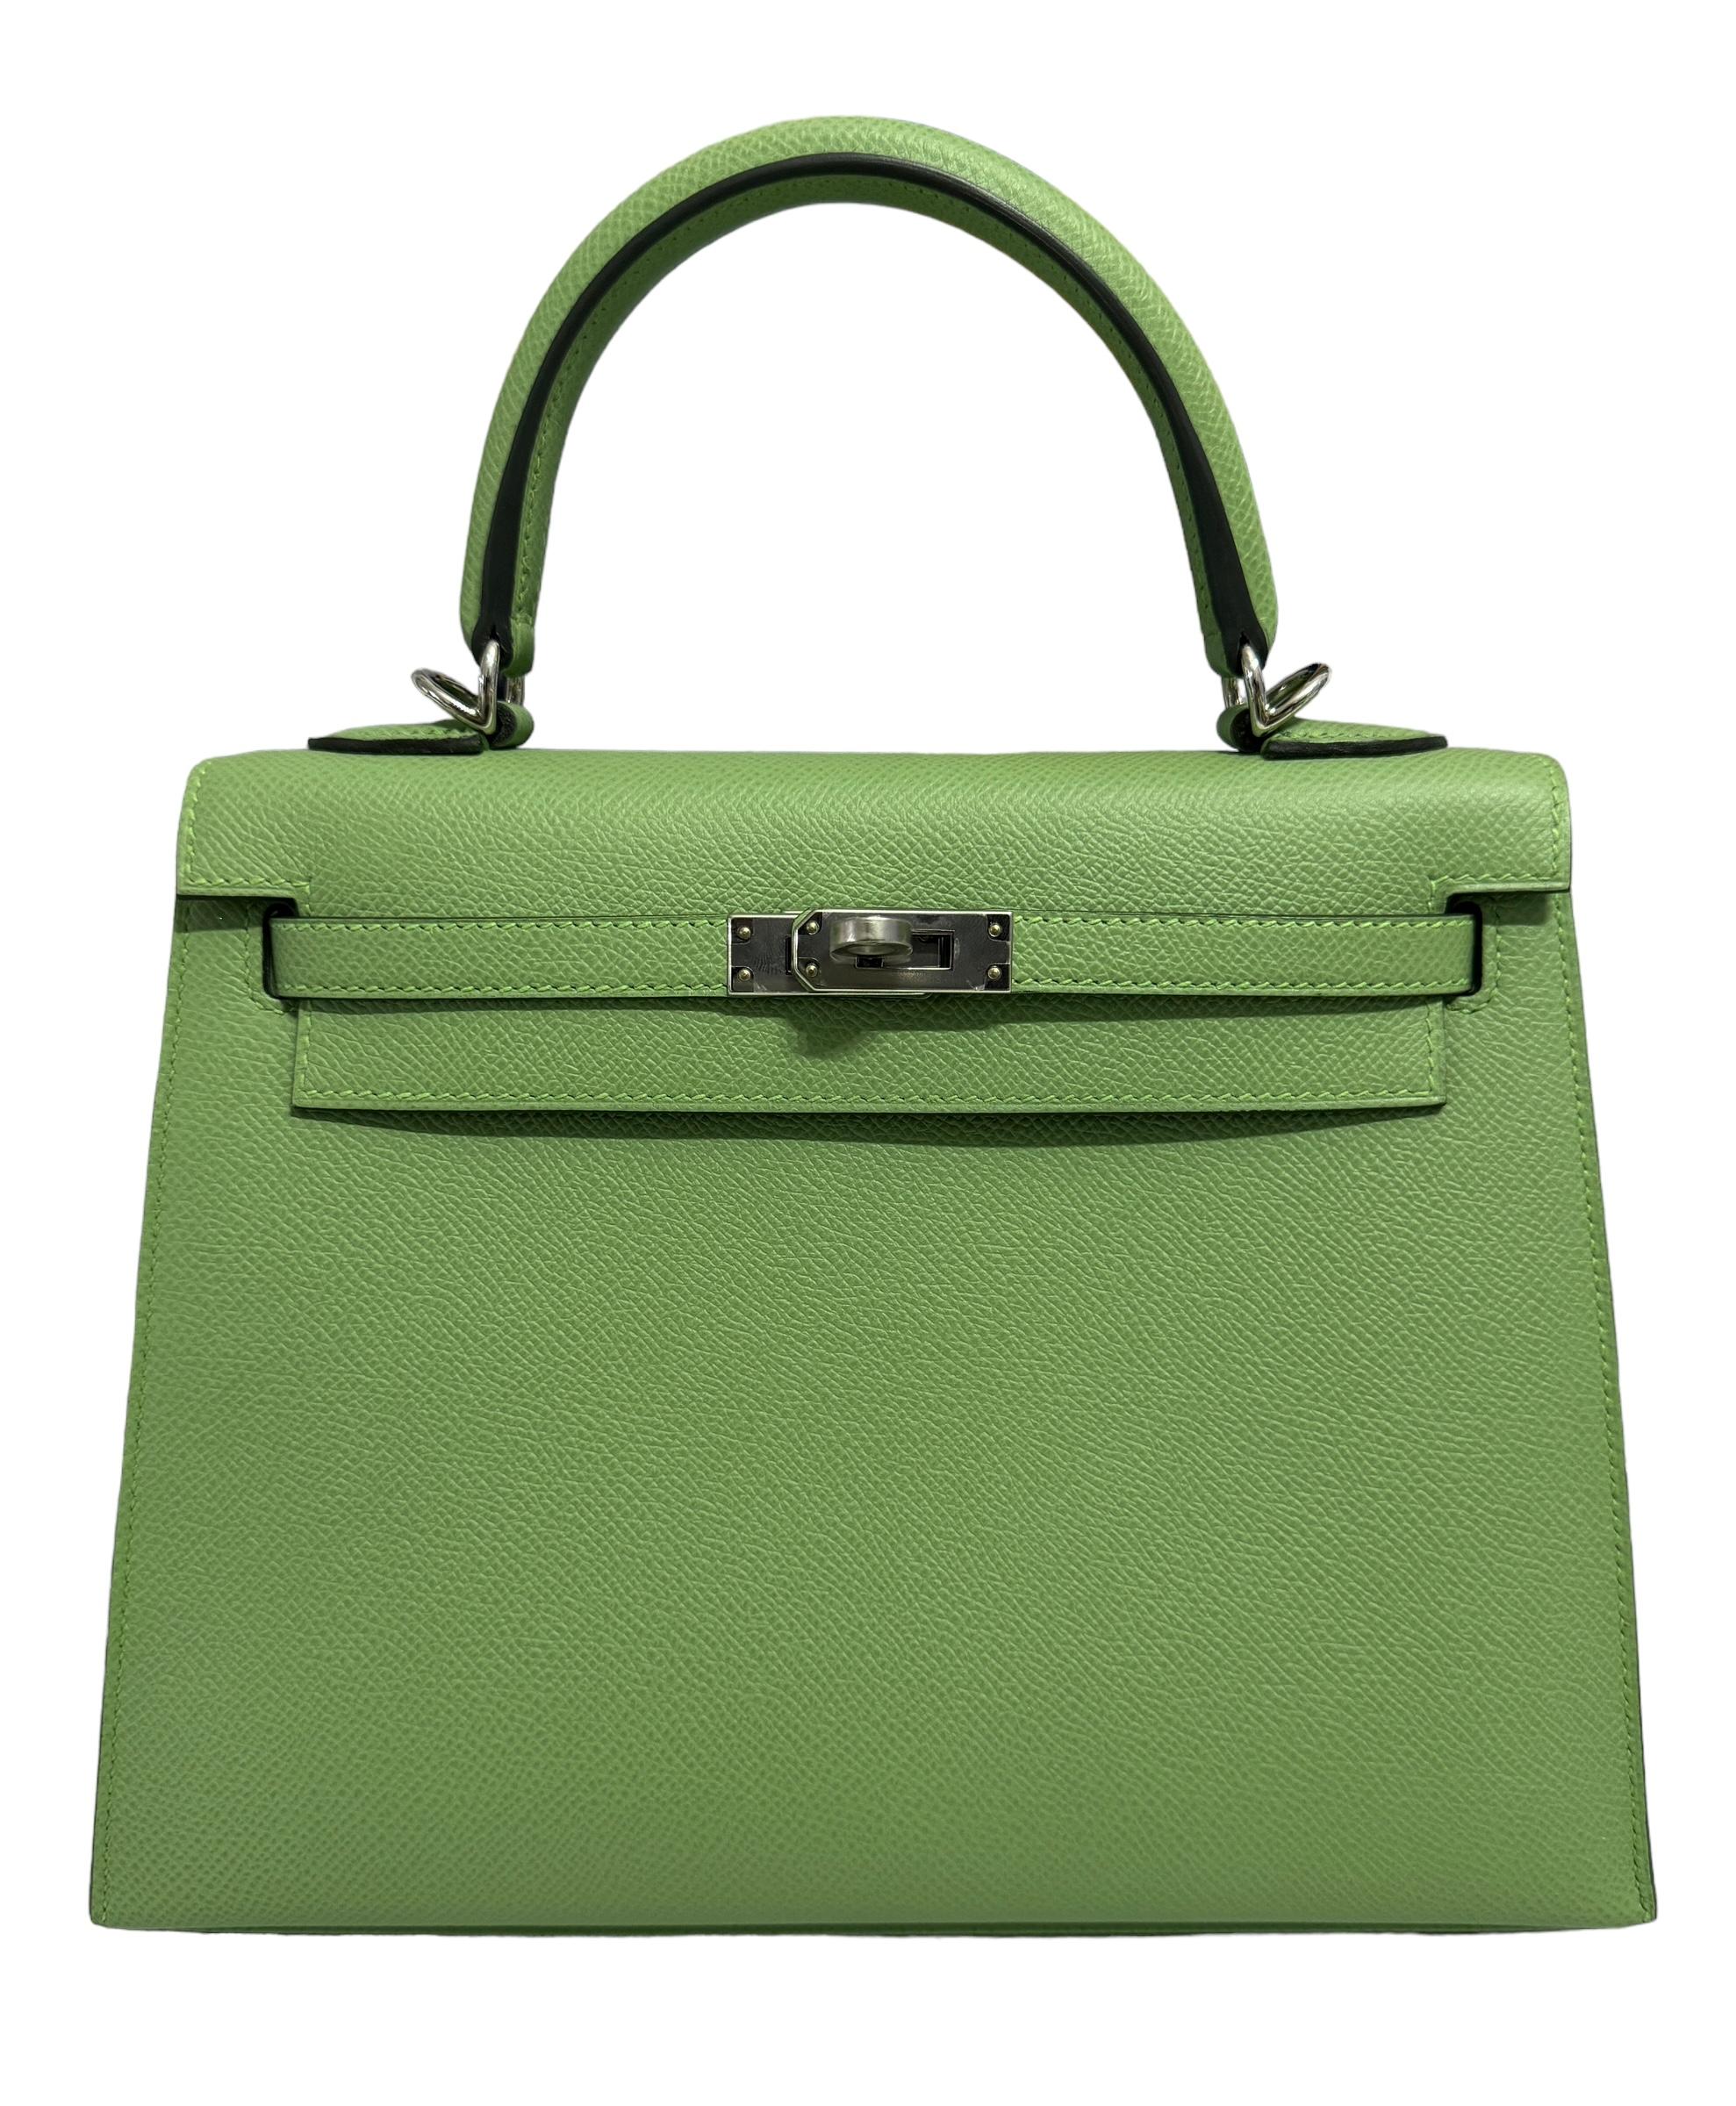 As New VERY RARE Most Coveted Color since its release! Hermes Kelly 25 Sellier Vert Criquet Epsom Leather , Complimented by Palladium Hardware. AS NEW Y STAMP 2020. Includes all Accessories and Box.

Shop with confidence from Lux Addicts.